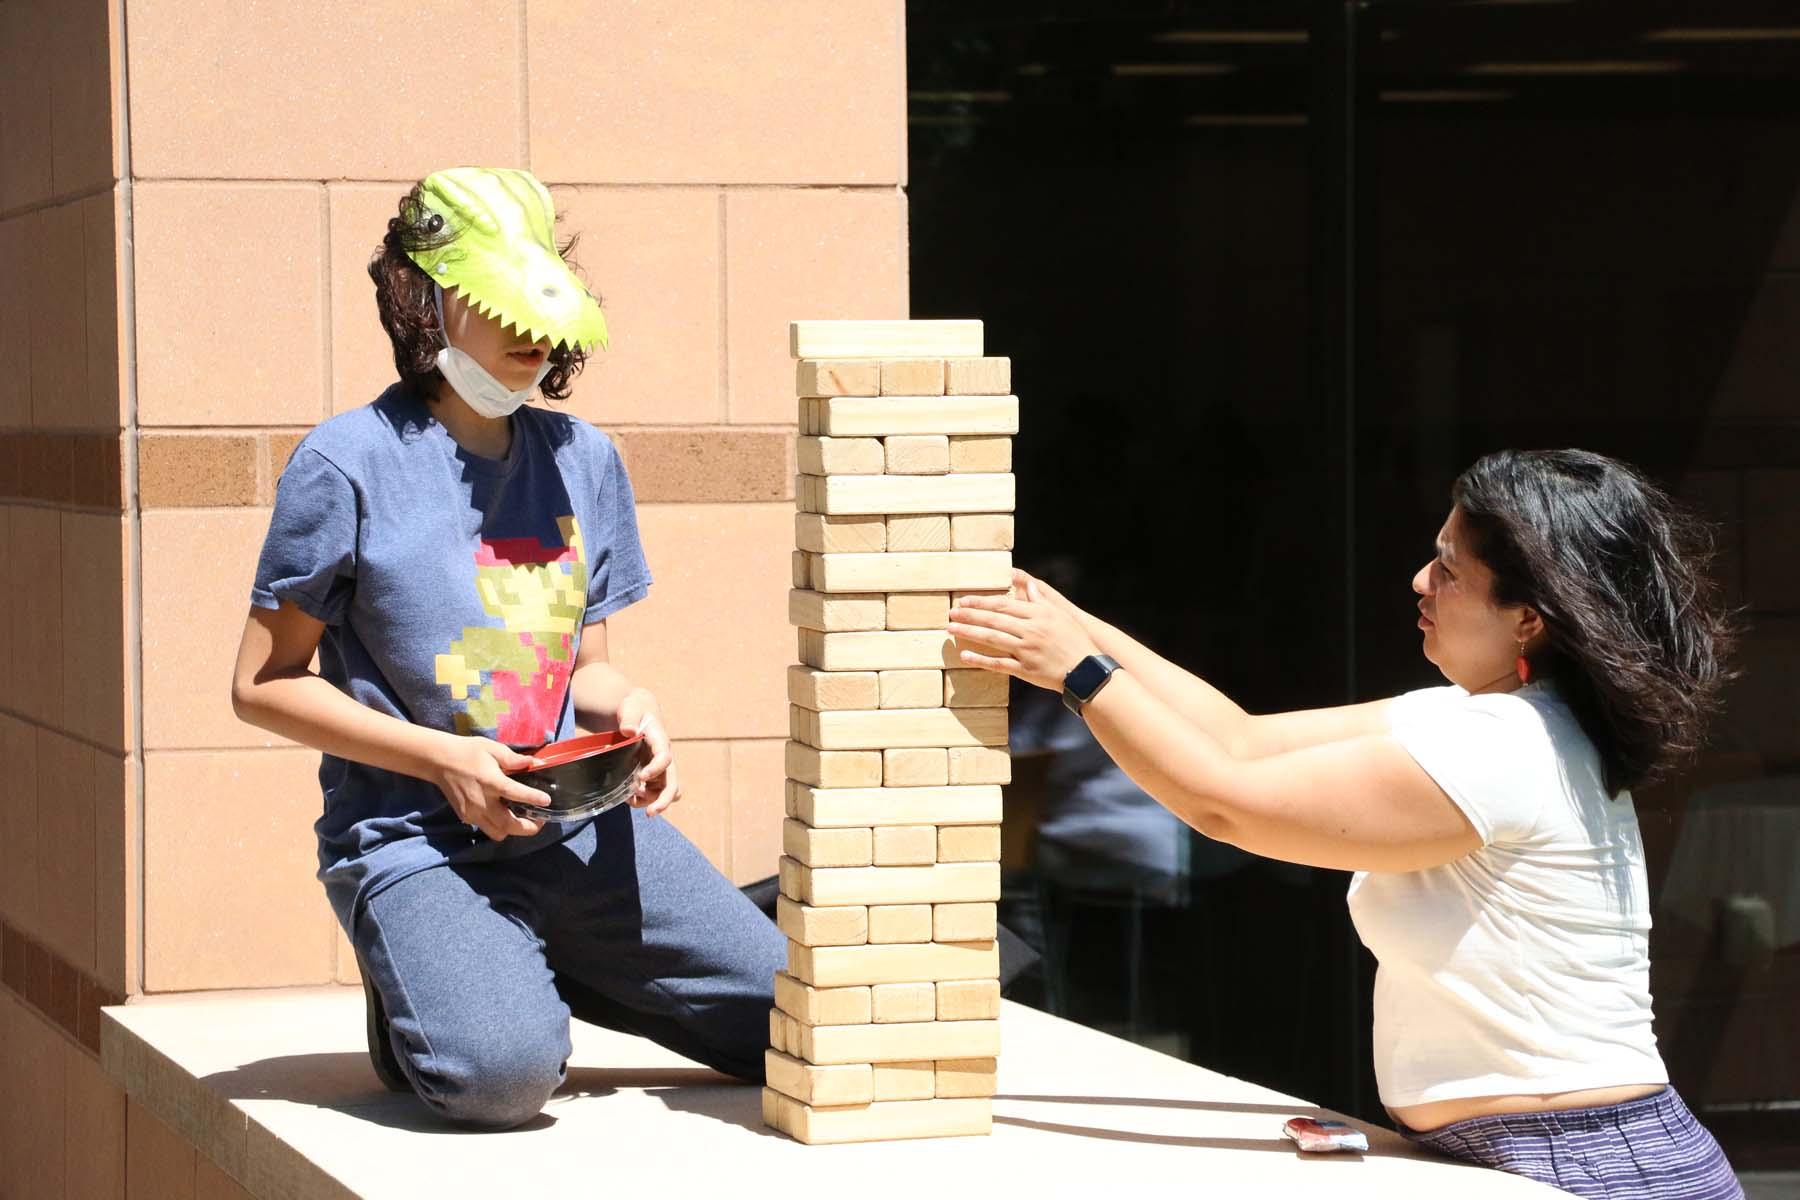 Two people playing with large jenga blocks at an outdoor party